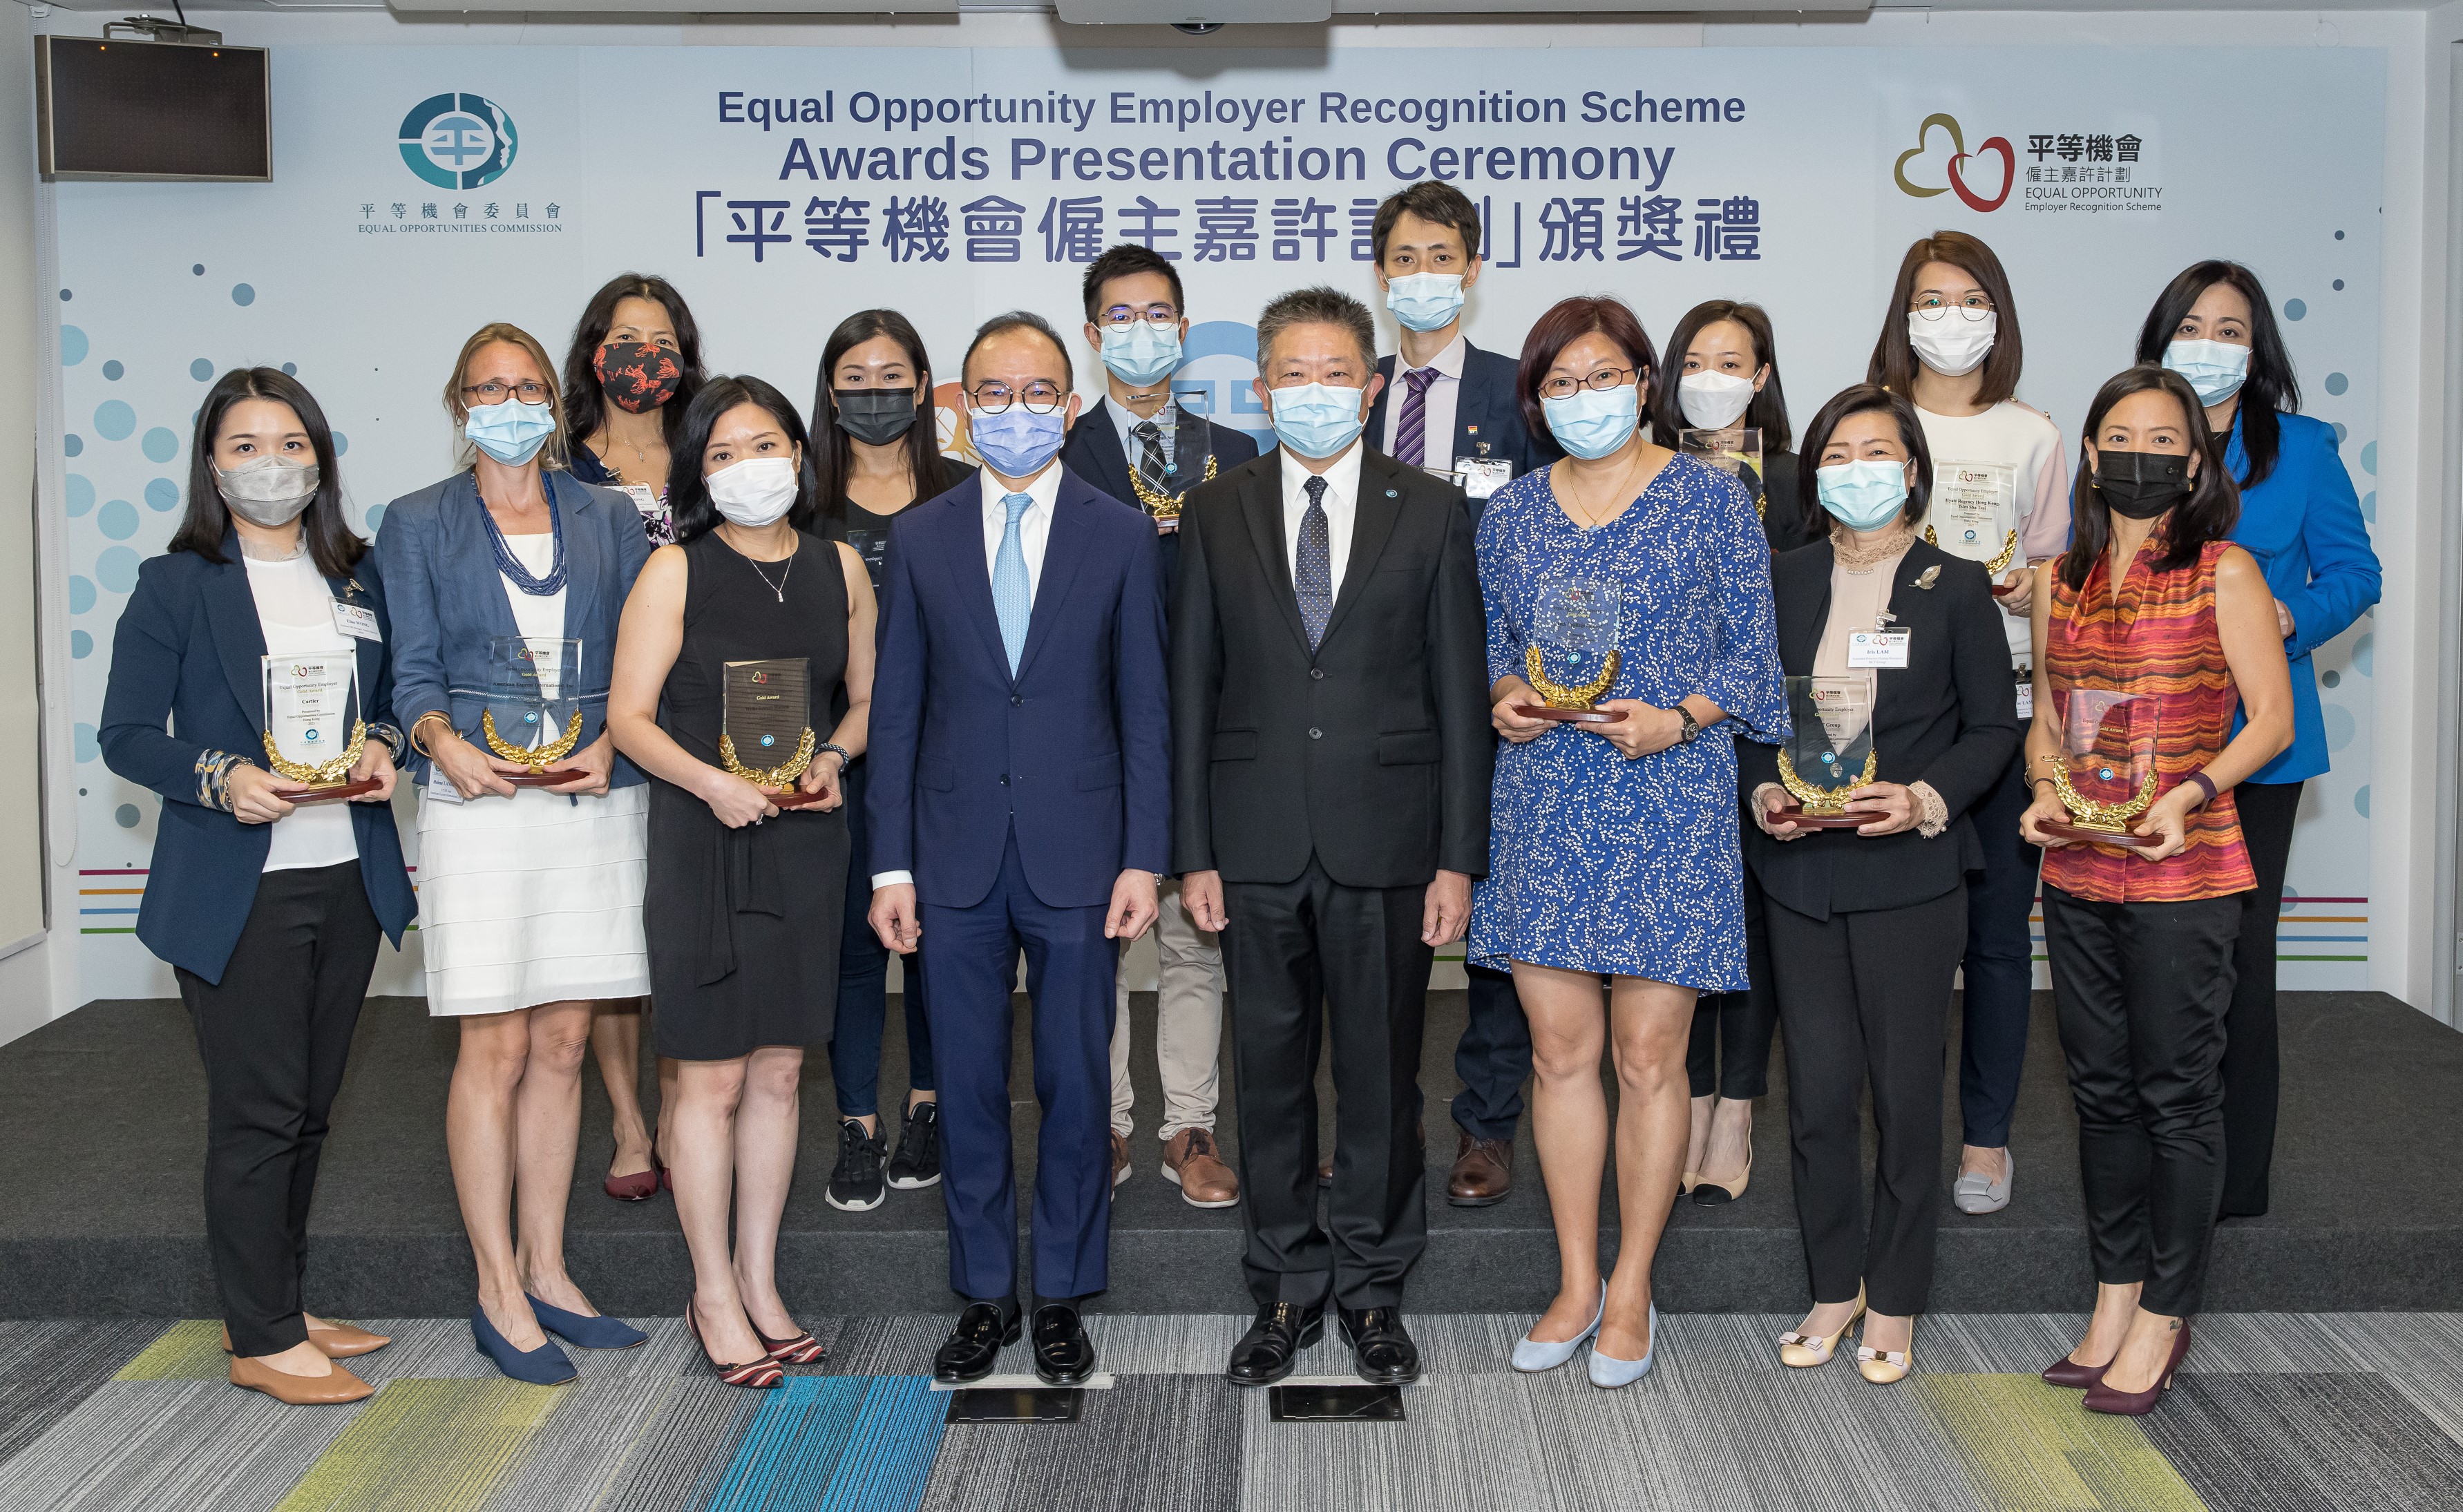 Mr Erick TSANG Kwok-wai, IDSM, JP, Secretary for Constitutional and Mainland Affairs (front row, fourth left), and Mr Ricky CHU Man-kin, IDS, Chairperson of the EOC (front row, fourth right) officiate at the Awards Presentation Ceremony and present trophies to the winners of the Equal Opportunity Employer Gold Award.